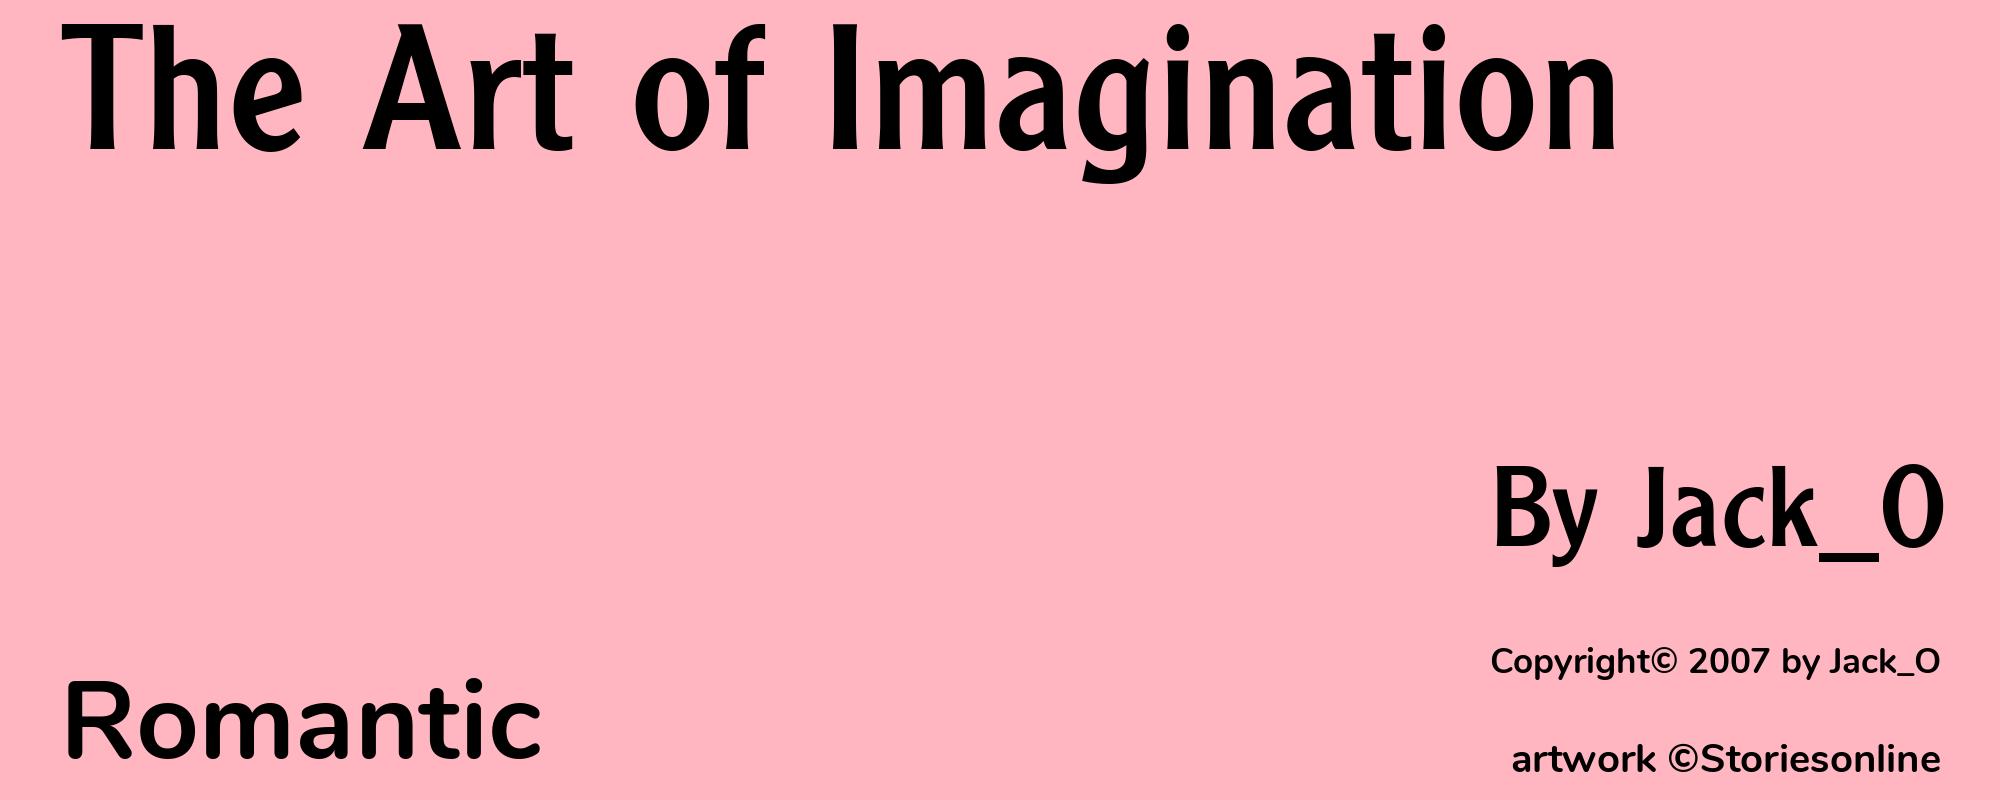 The Art of Imagination - Cover